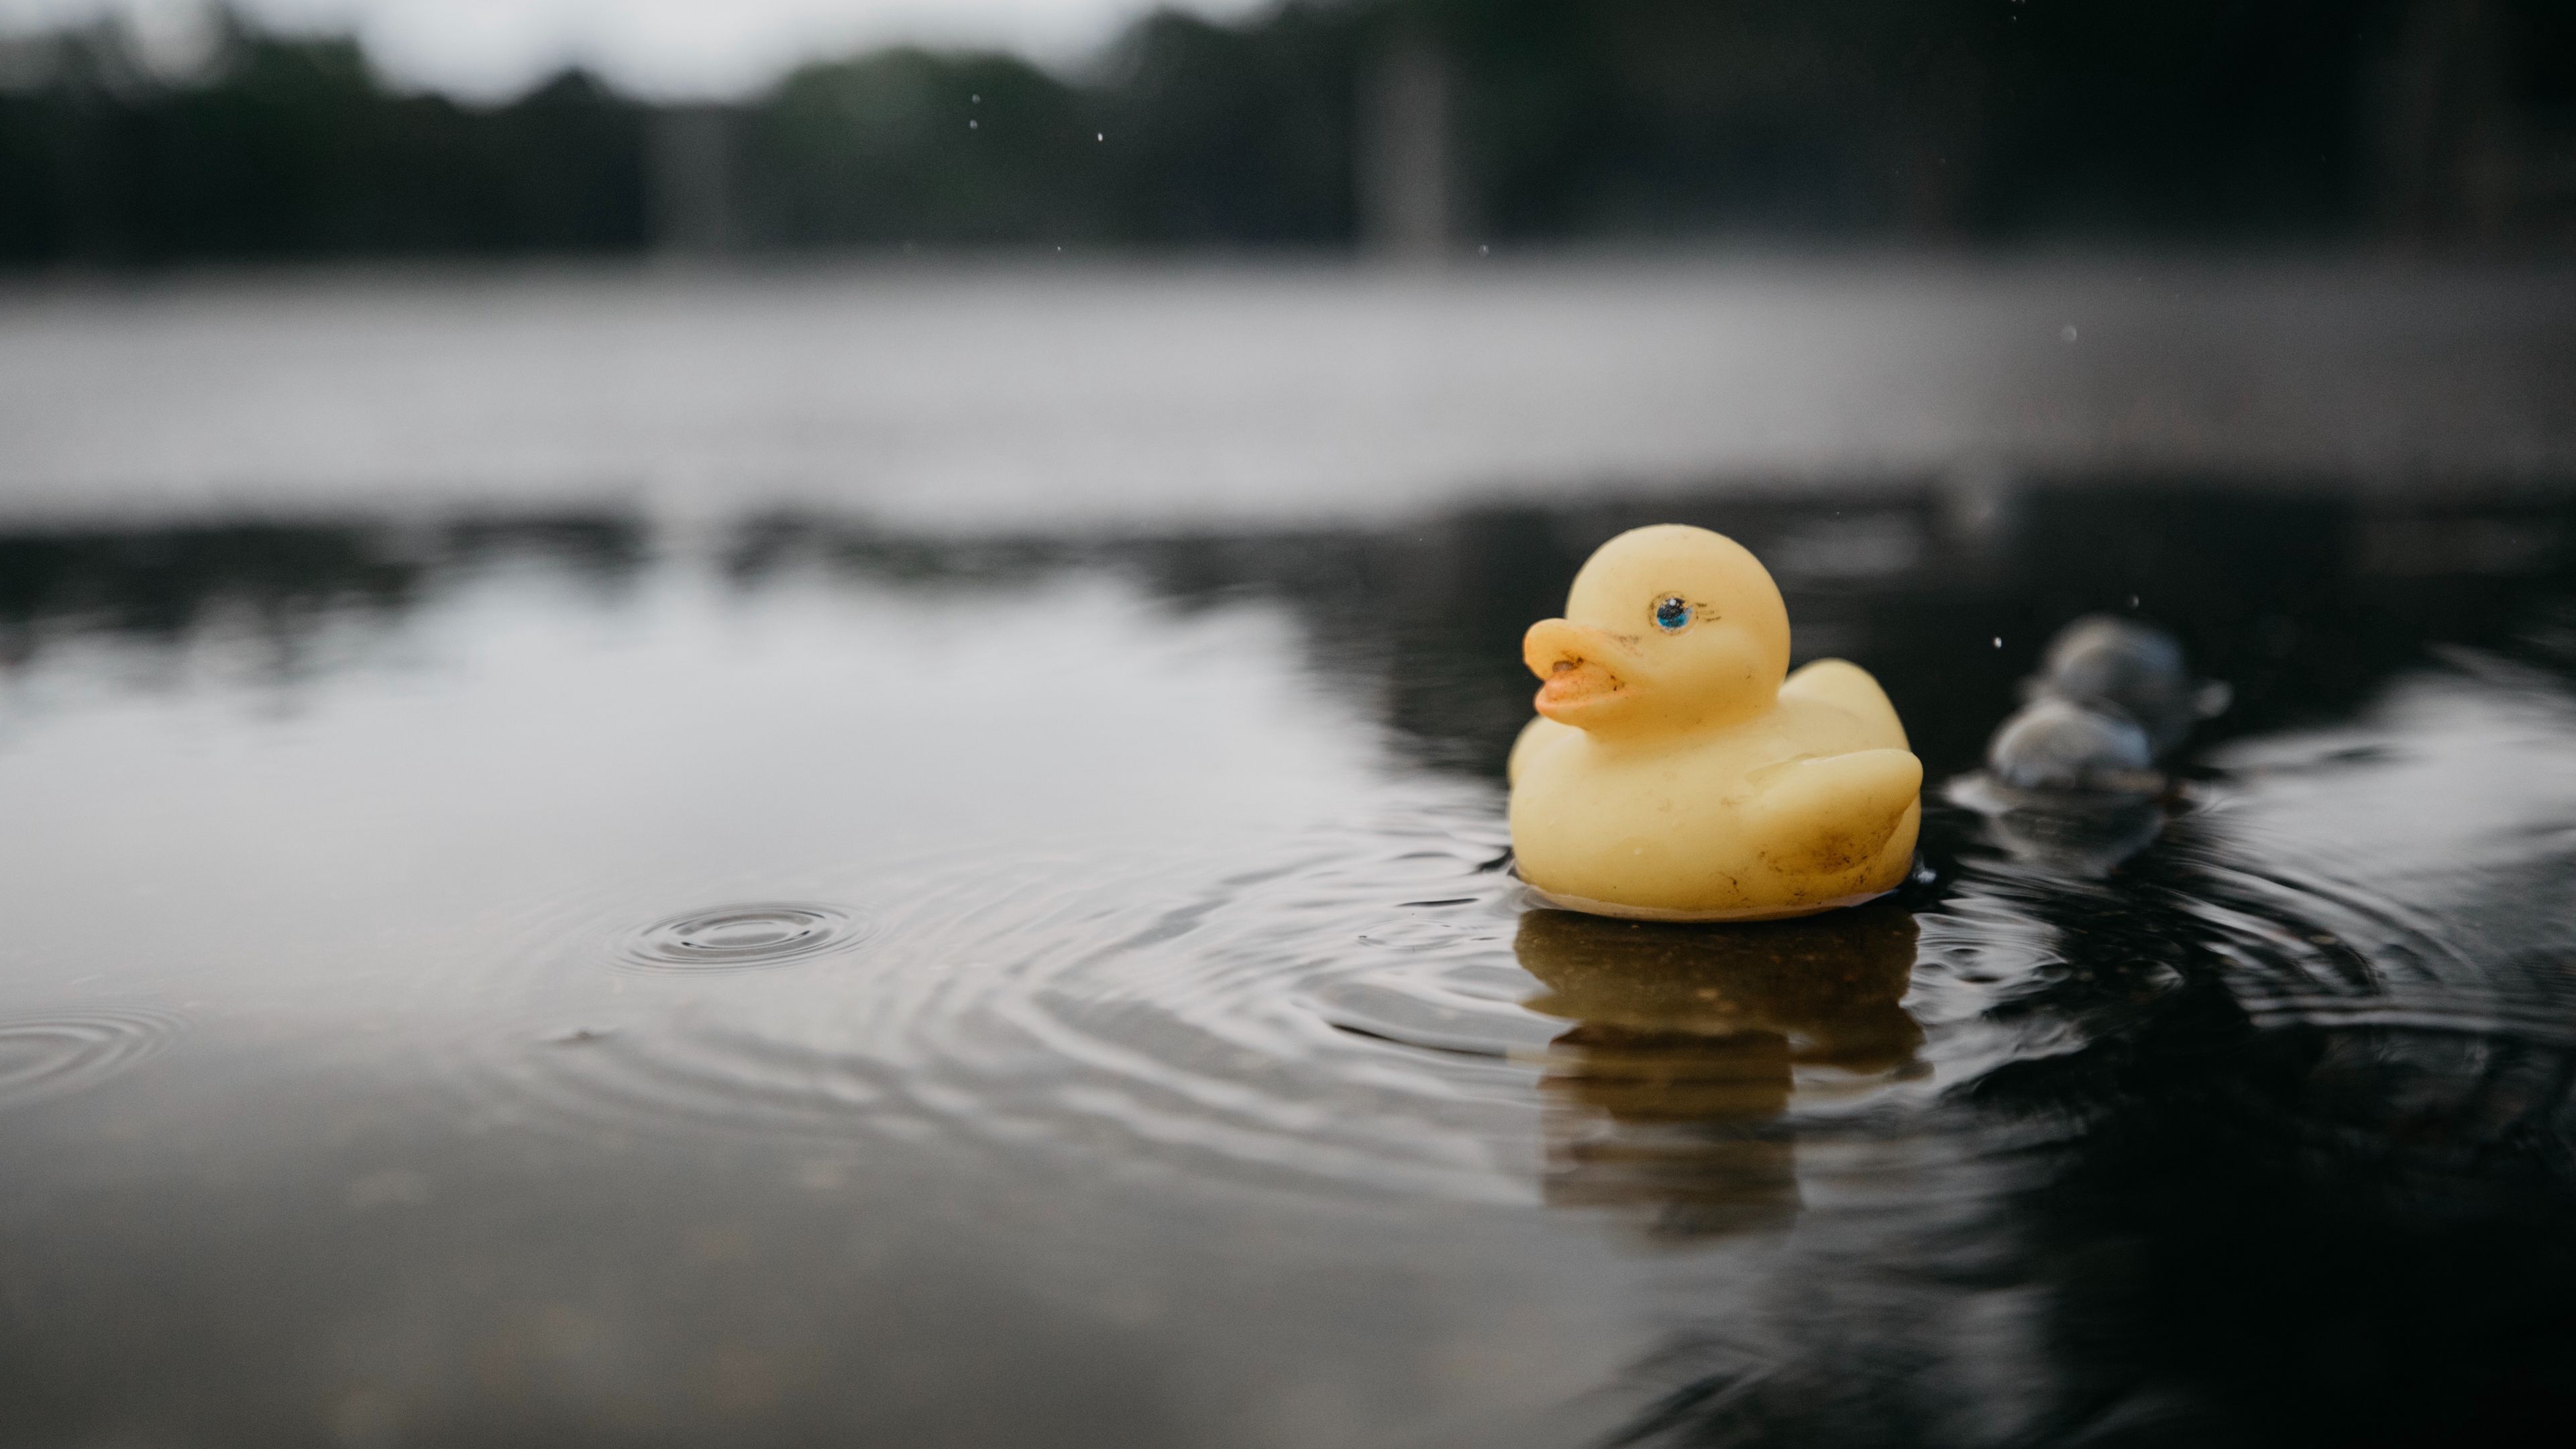 Wallpaper / rubber duck, duck, toy, puddle, water, 4k free download